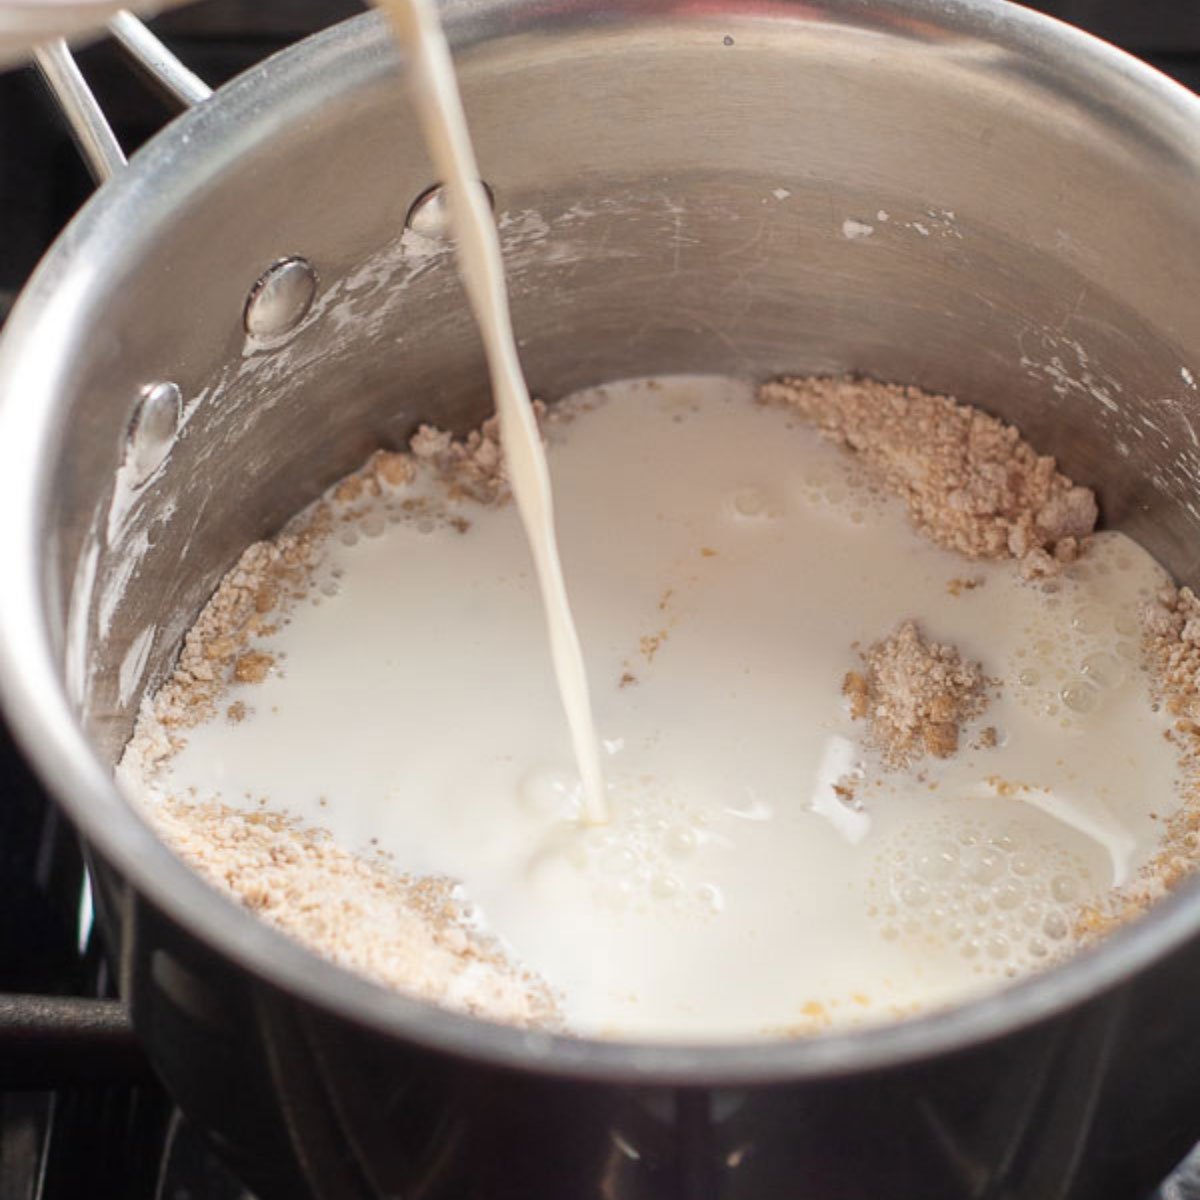 milk being poured into dry ingredients.